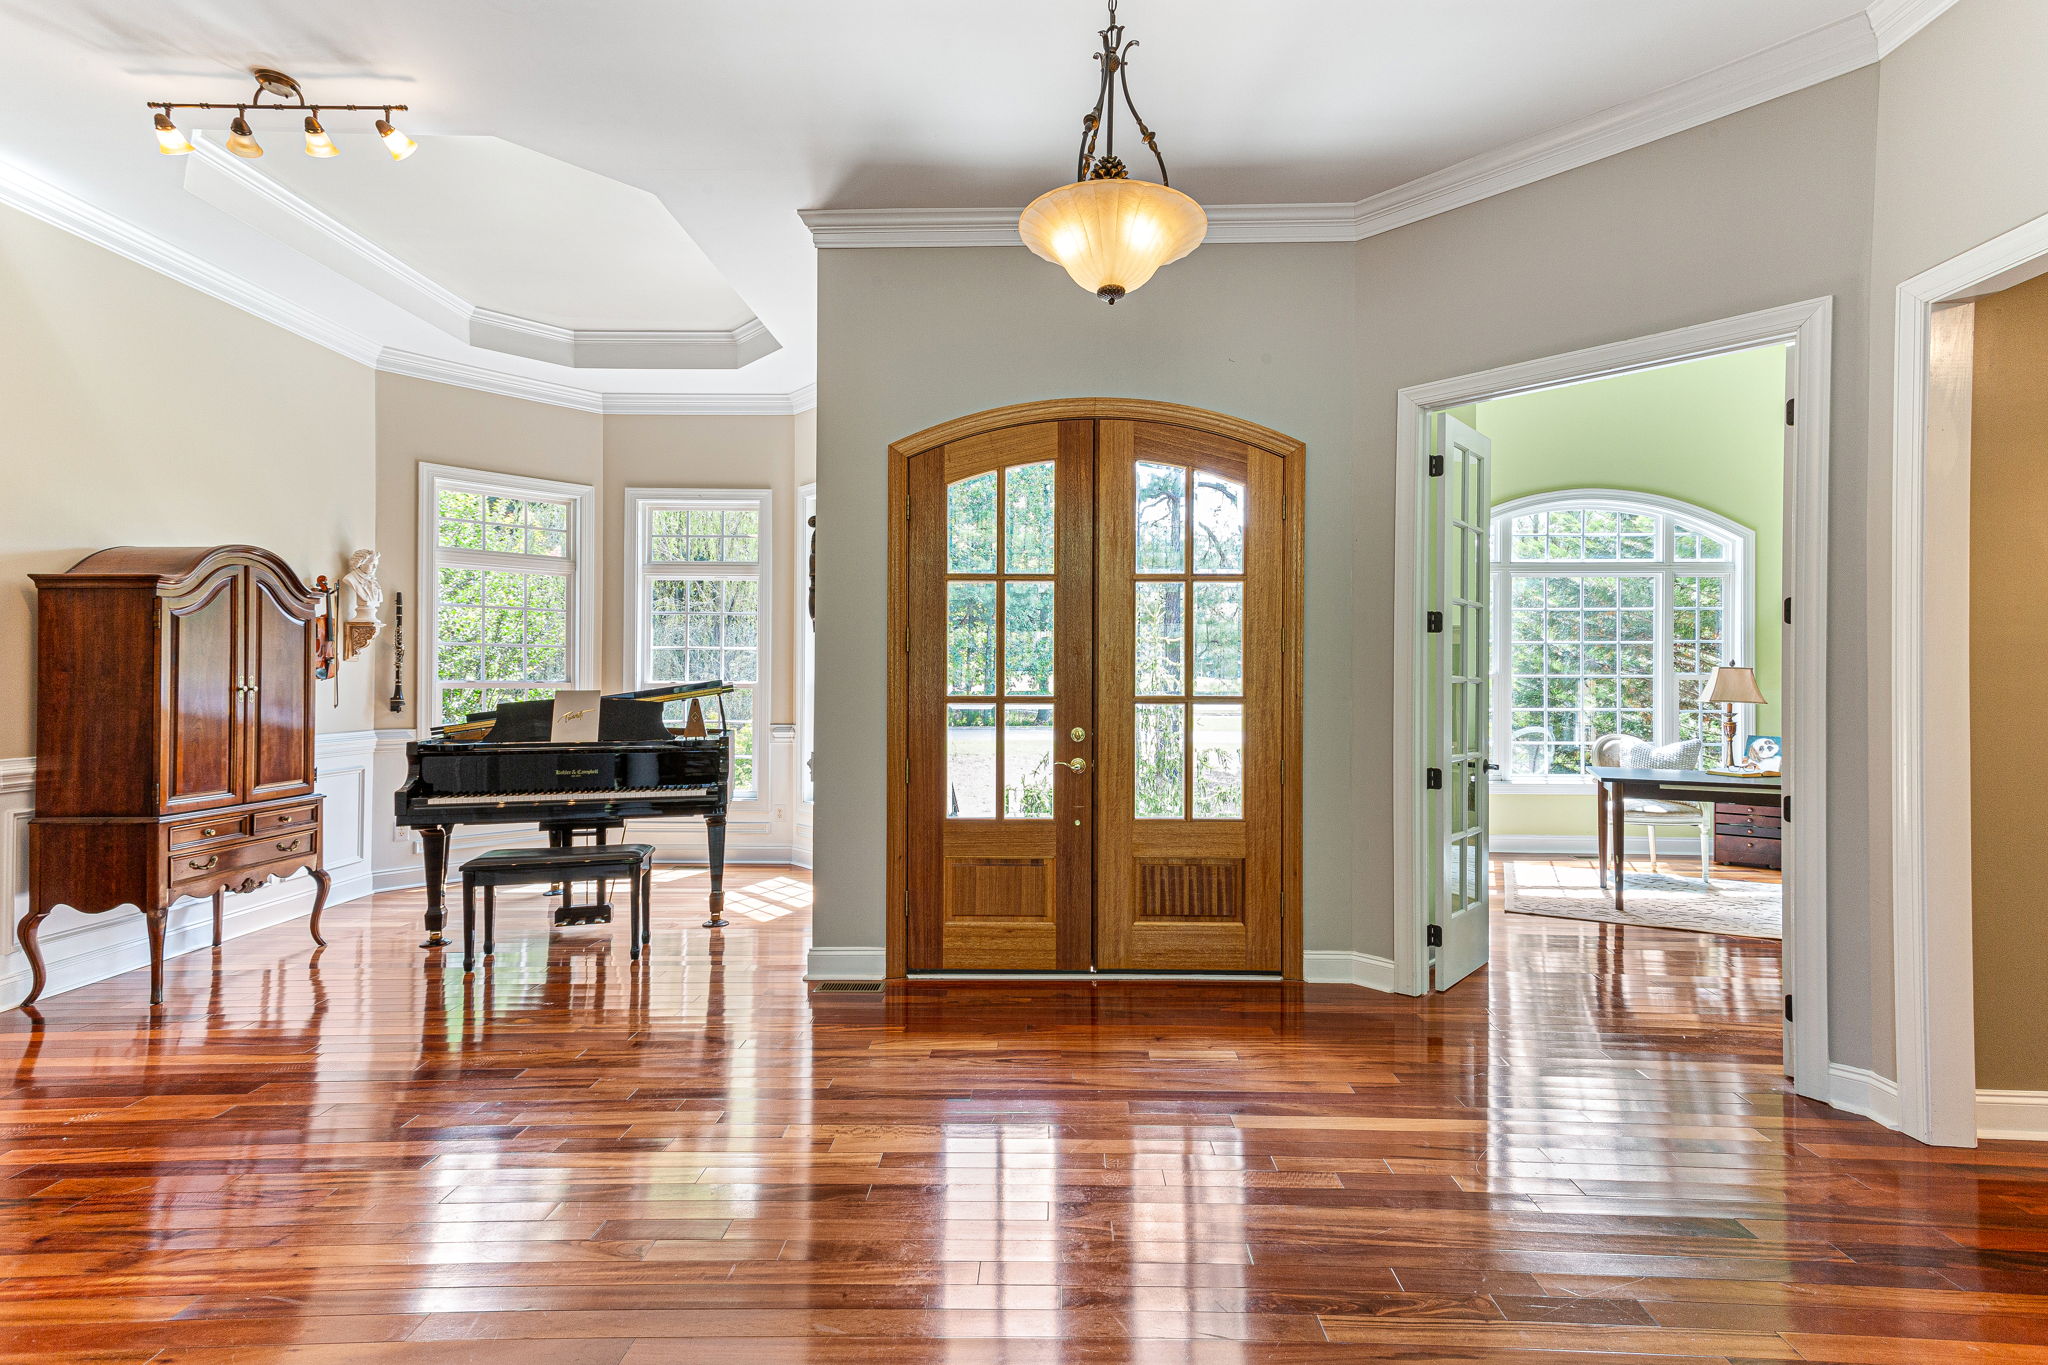 Piano room with tray ceiling and chair rail wainscoting throughout.